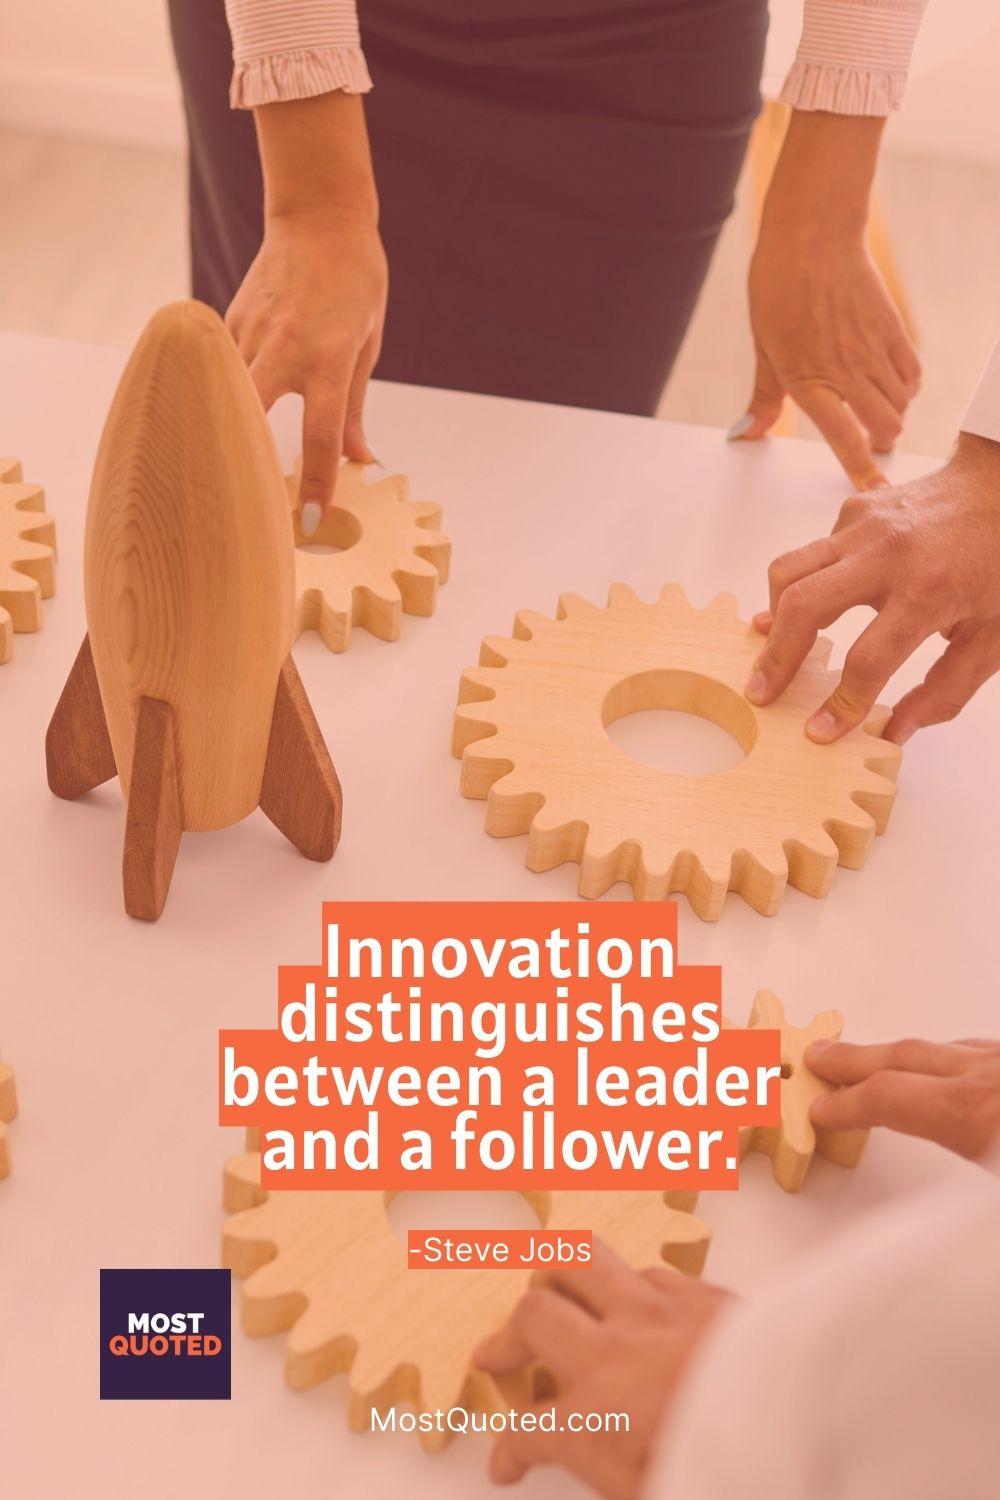 Innovation distinguishes between a leader and a follower. - Steve Jobs